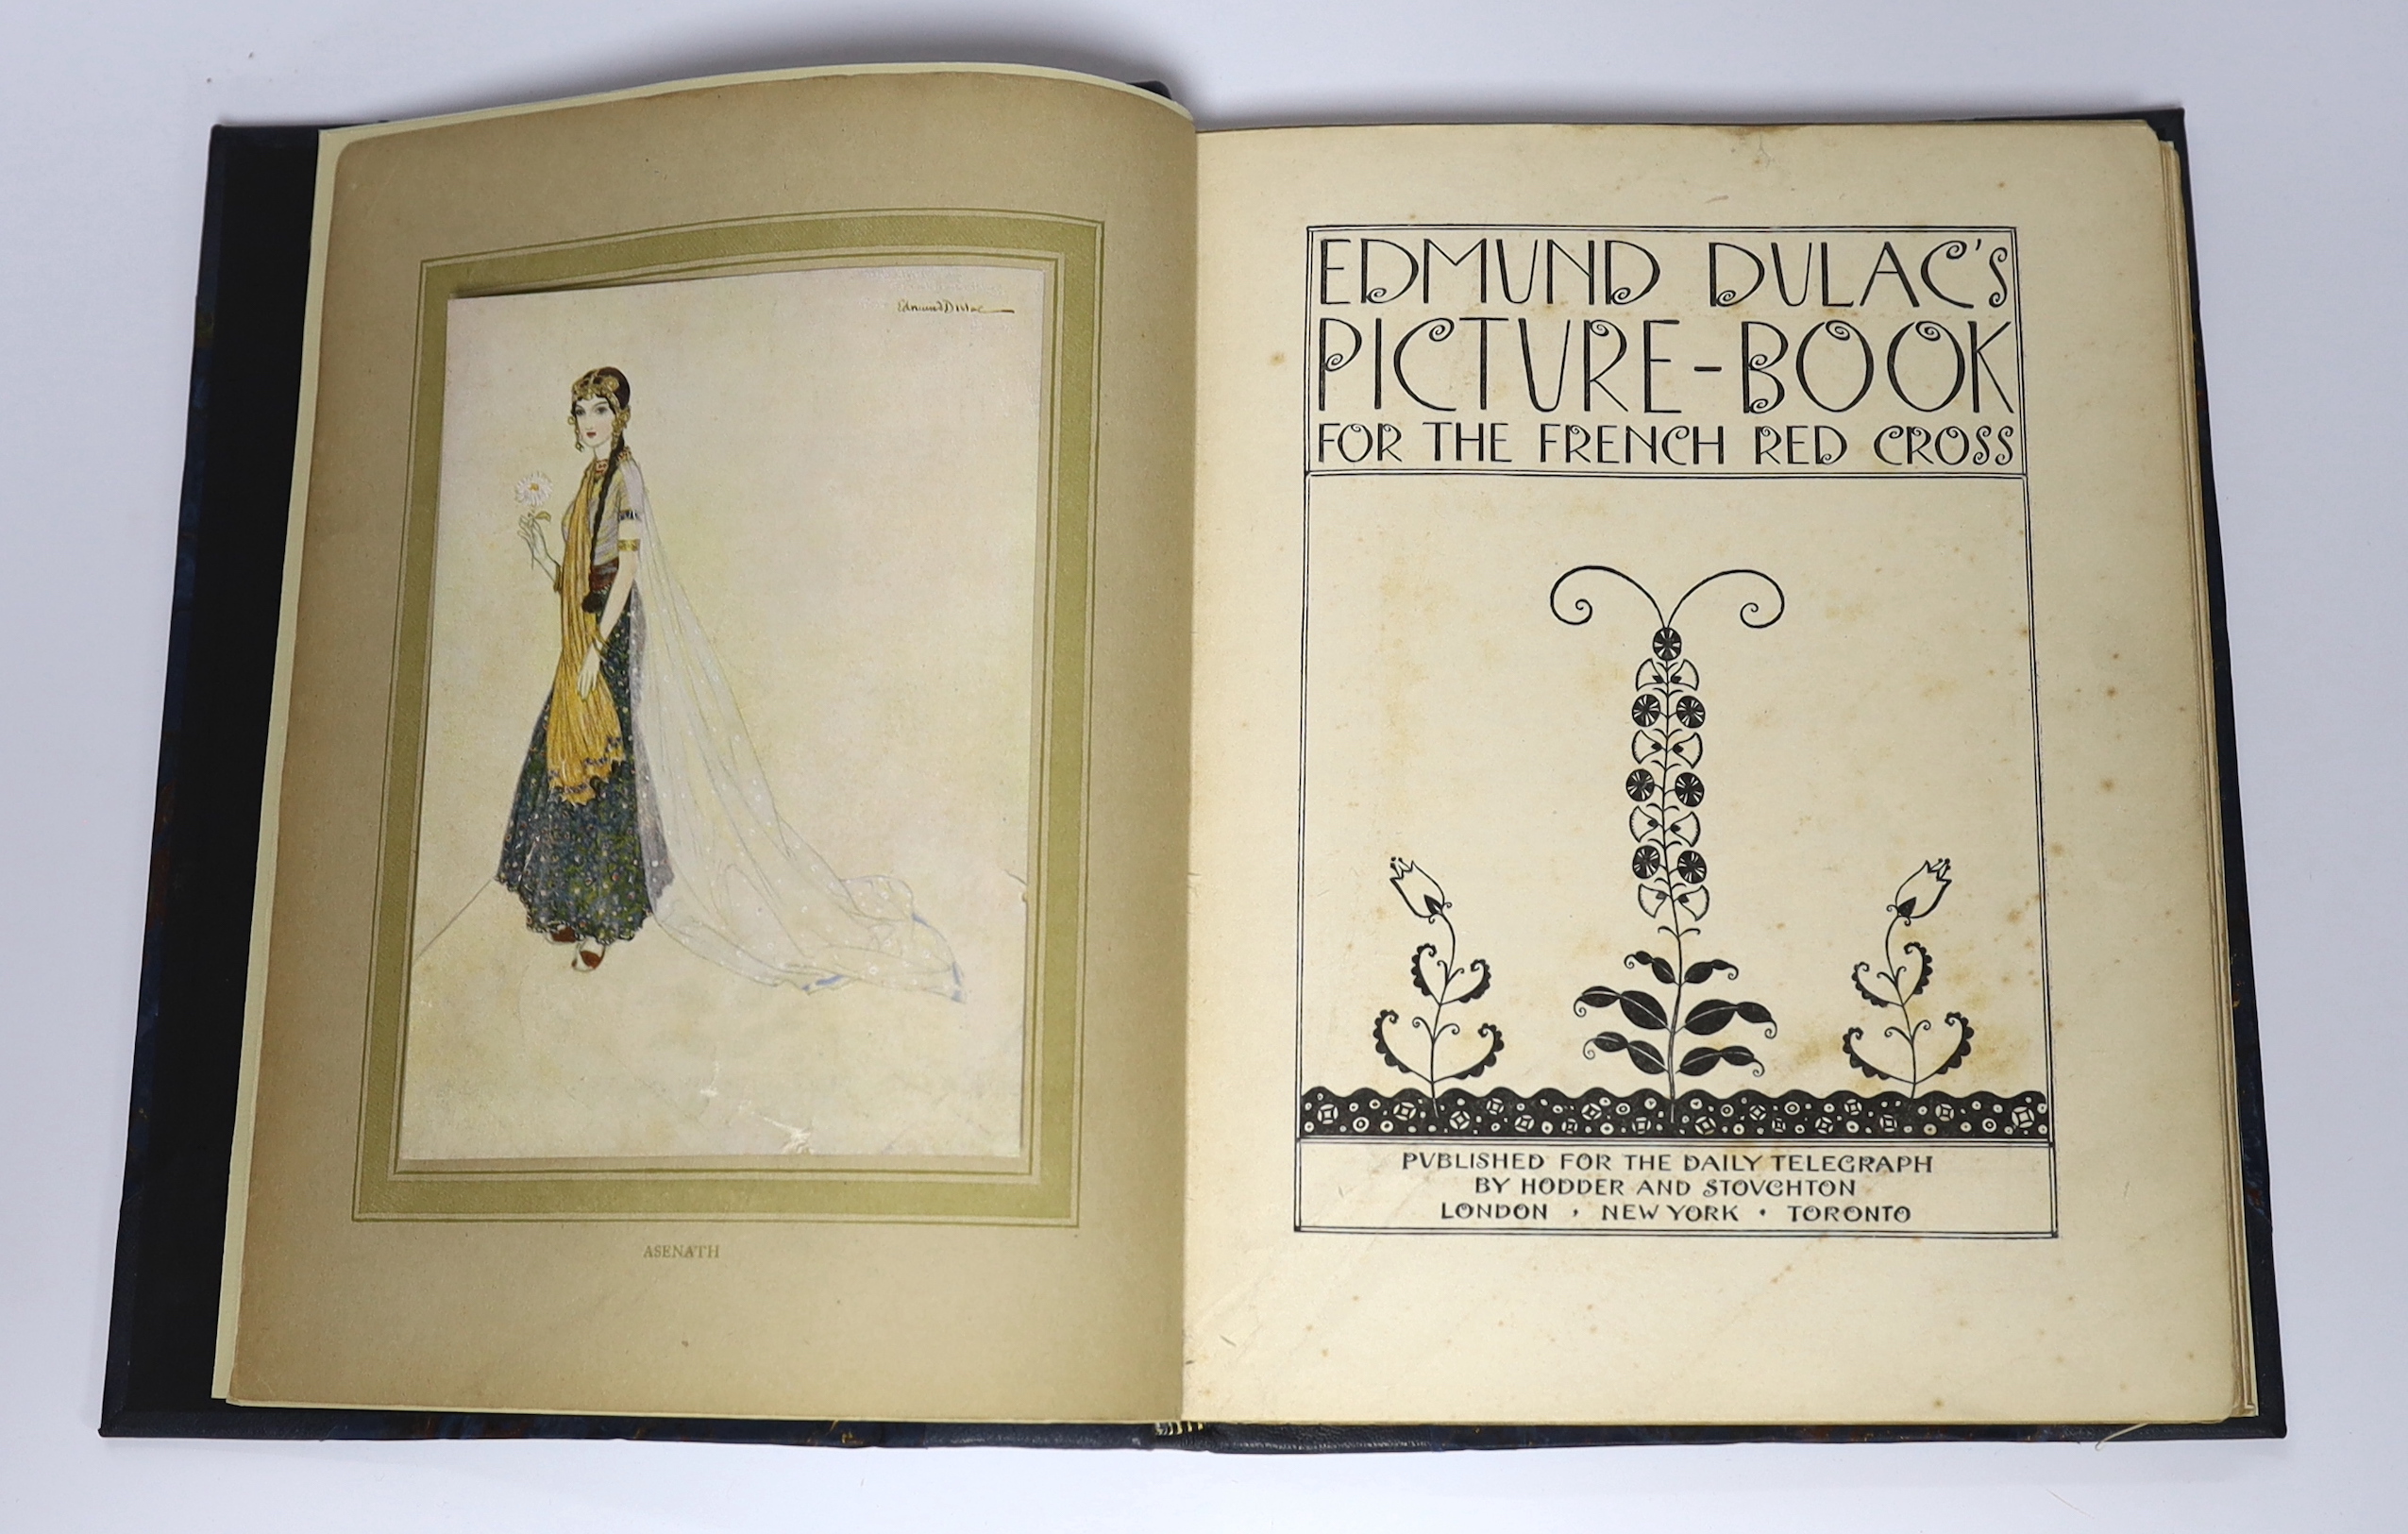 Dulac, Edmund - Edmund Dulac’s Picture-Book for the French Red Cross, 4to, rebound blue half morocco, with 20 tipped-in colour plates, Hodder and Stoughton, London, c. 1915, in slip case, and W. Heath Robinson (illustrat